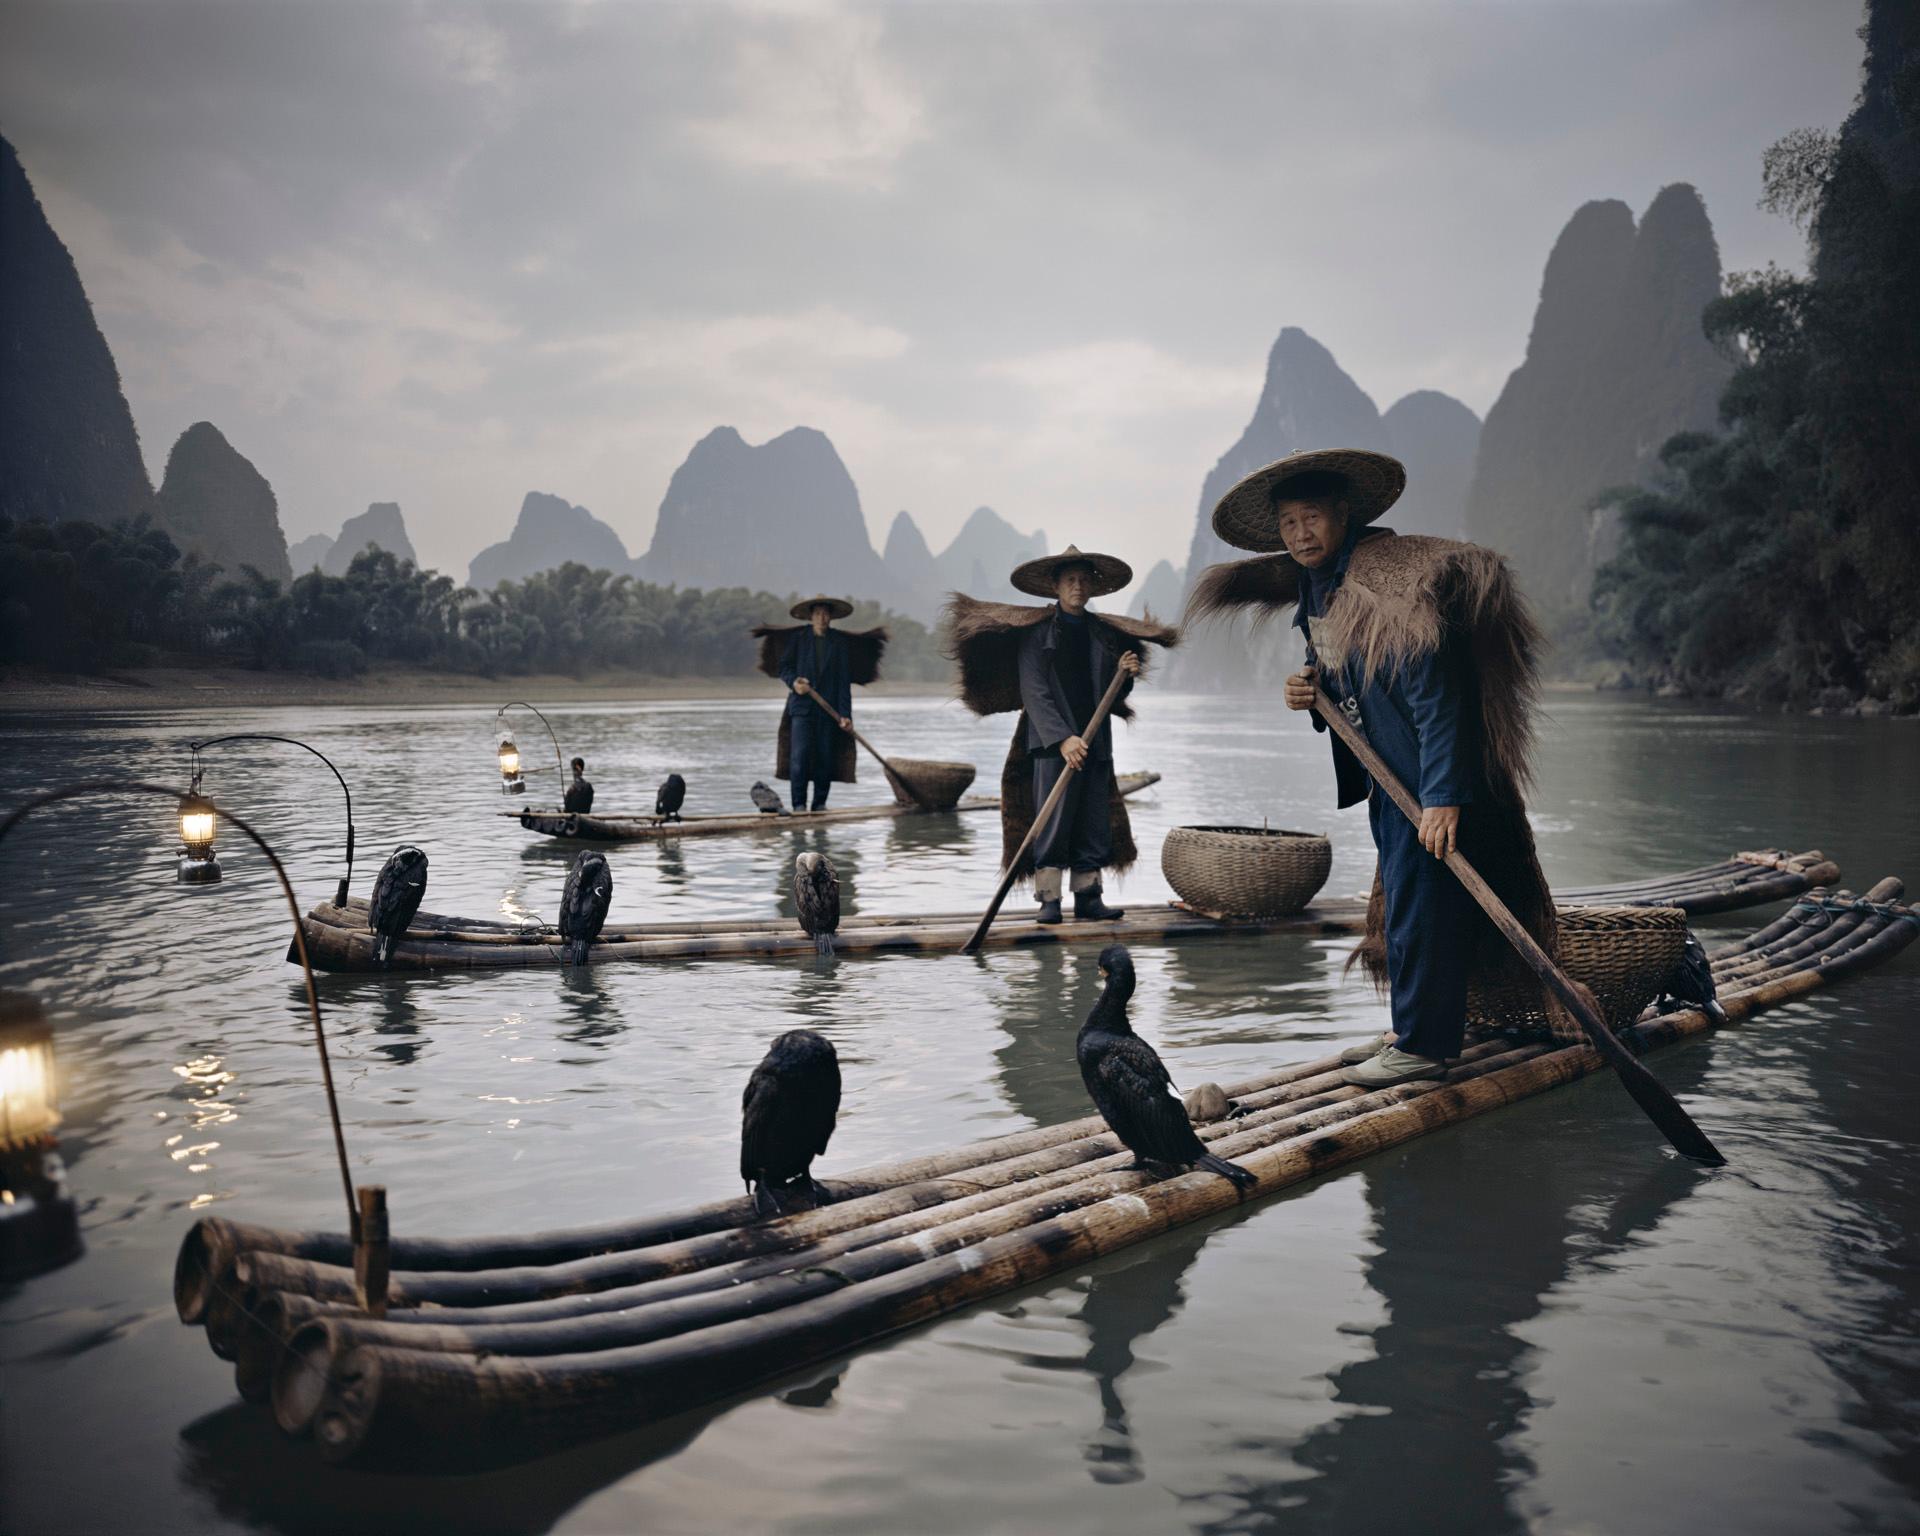 "XXII467 Yangshuo Cormorants

Yangshuo County is a county under the jurisdiction of Guilin City, in the northeast of Guangxi, China. Its seat is located in Yangshuo Town. Surrounded by karst peaks and bordered on one side by the Li River it is